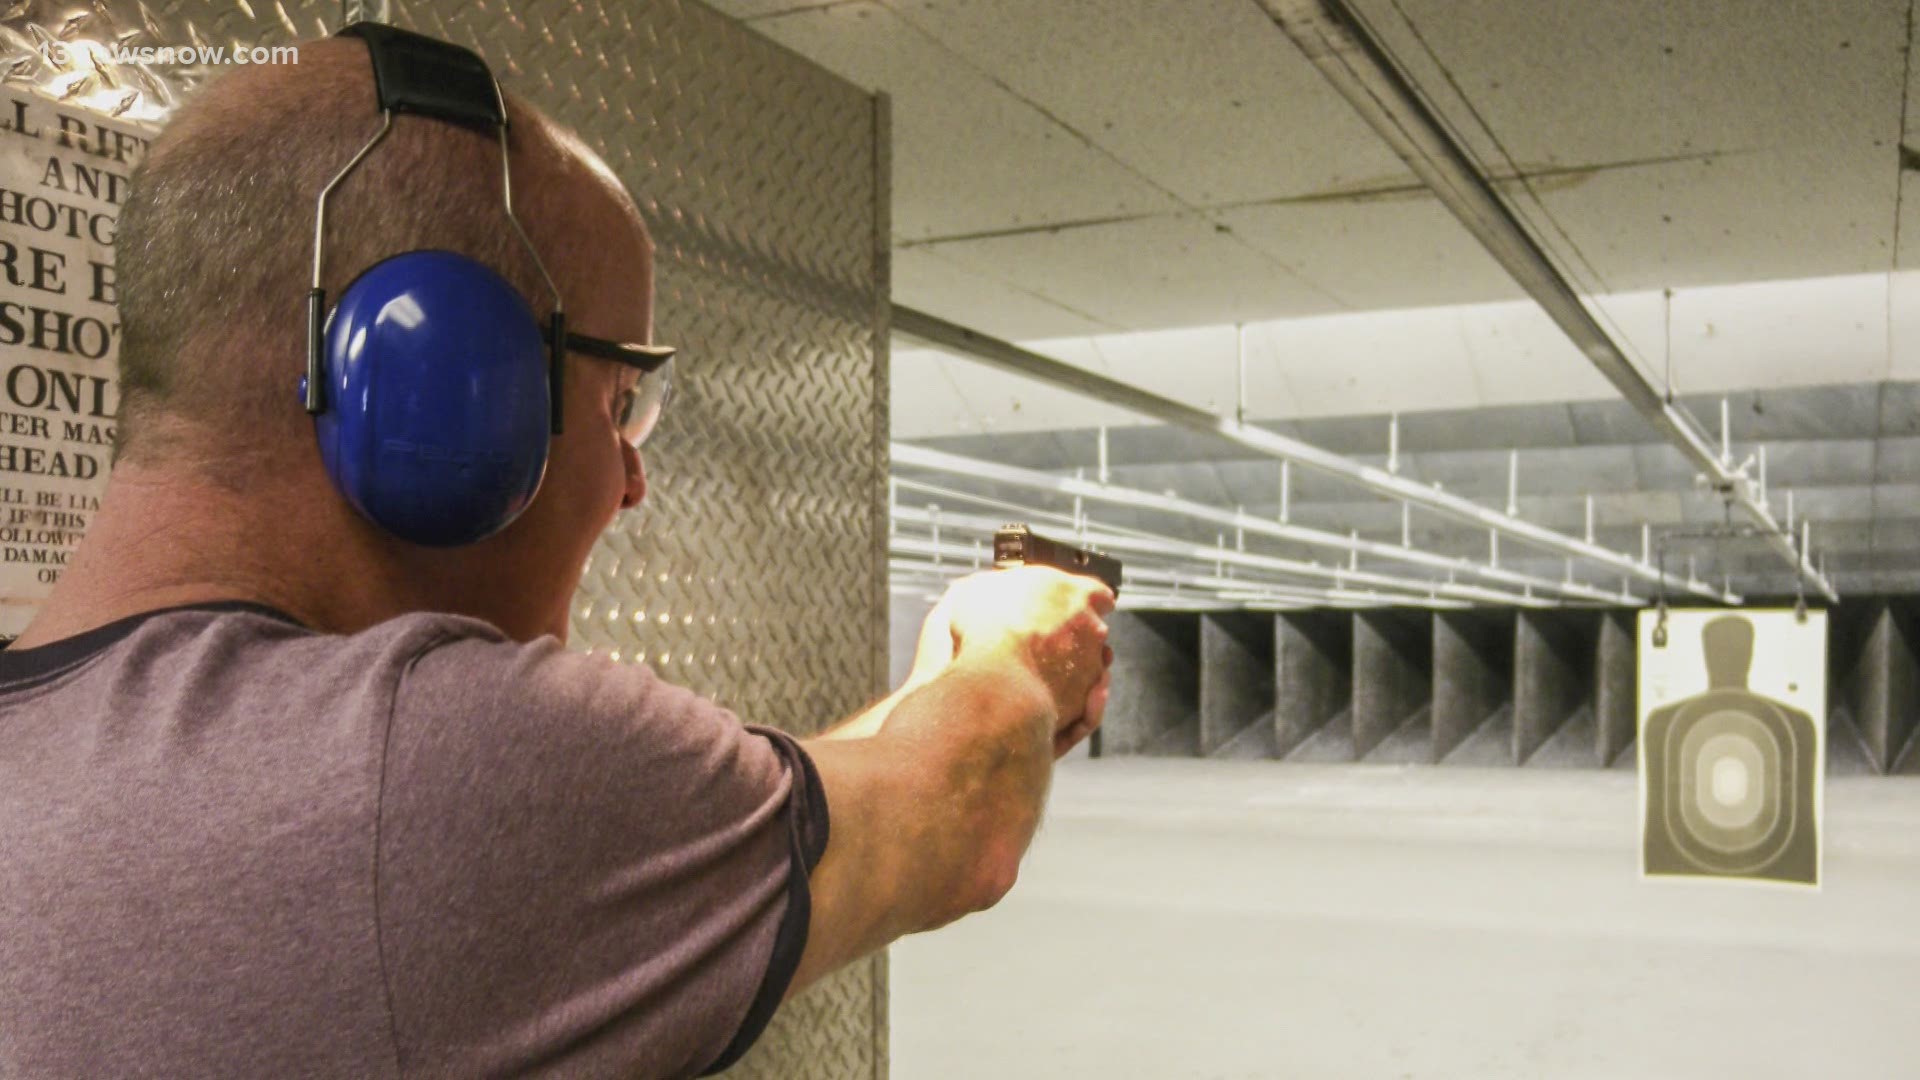 In 2021, it won't be possible anymore to get a concealed carry permit without in-person gun training. This doesn't apply to people who already have permits.